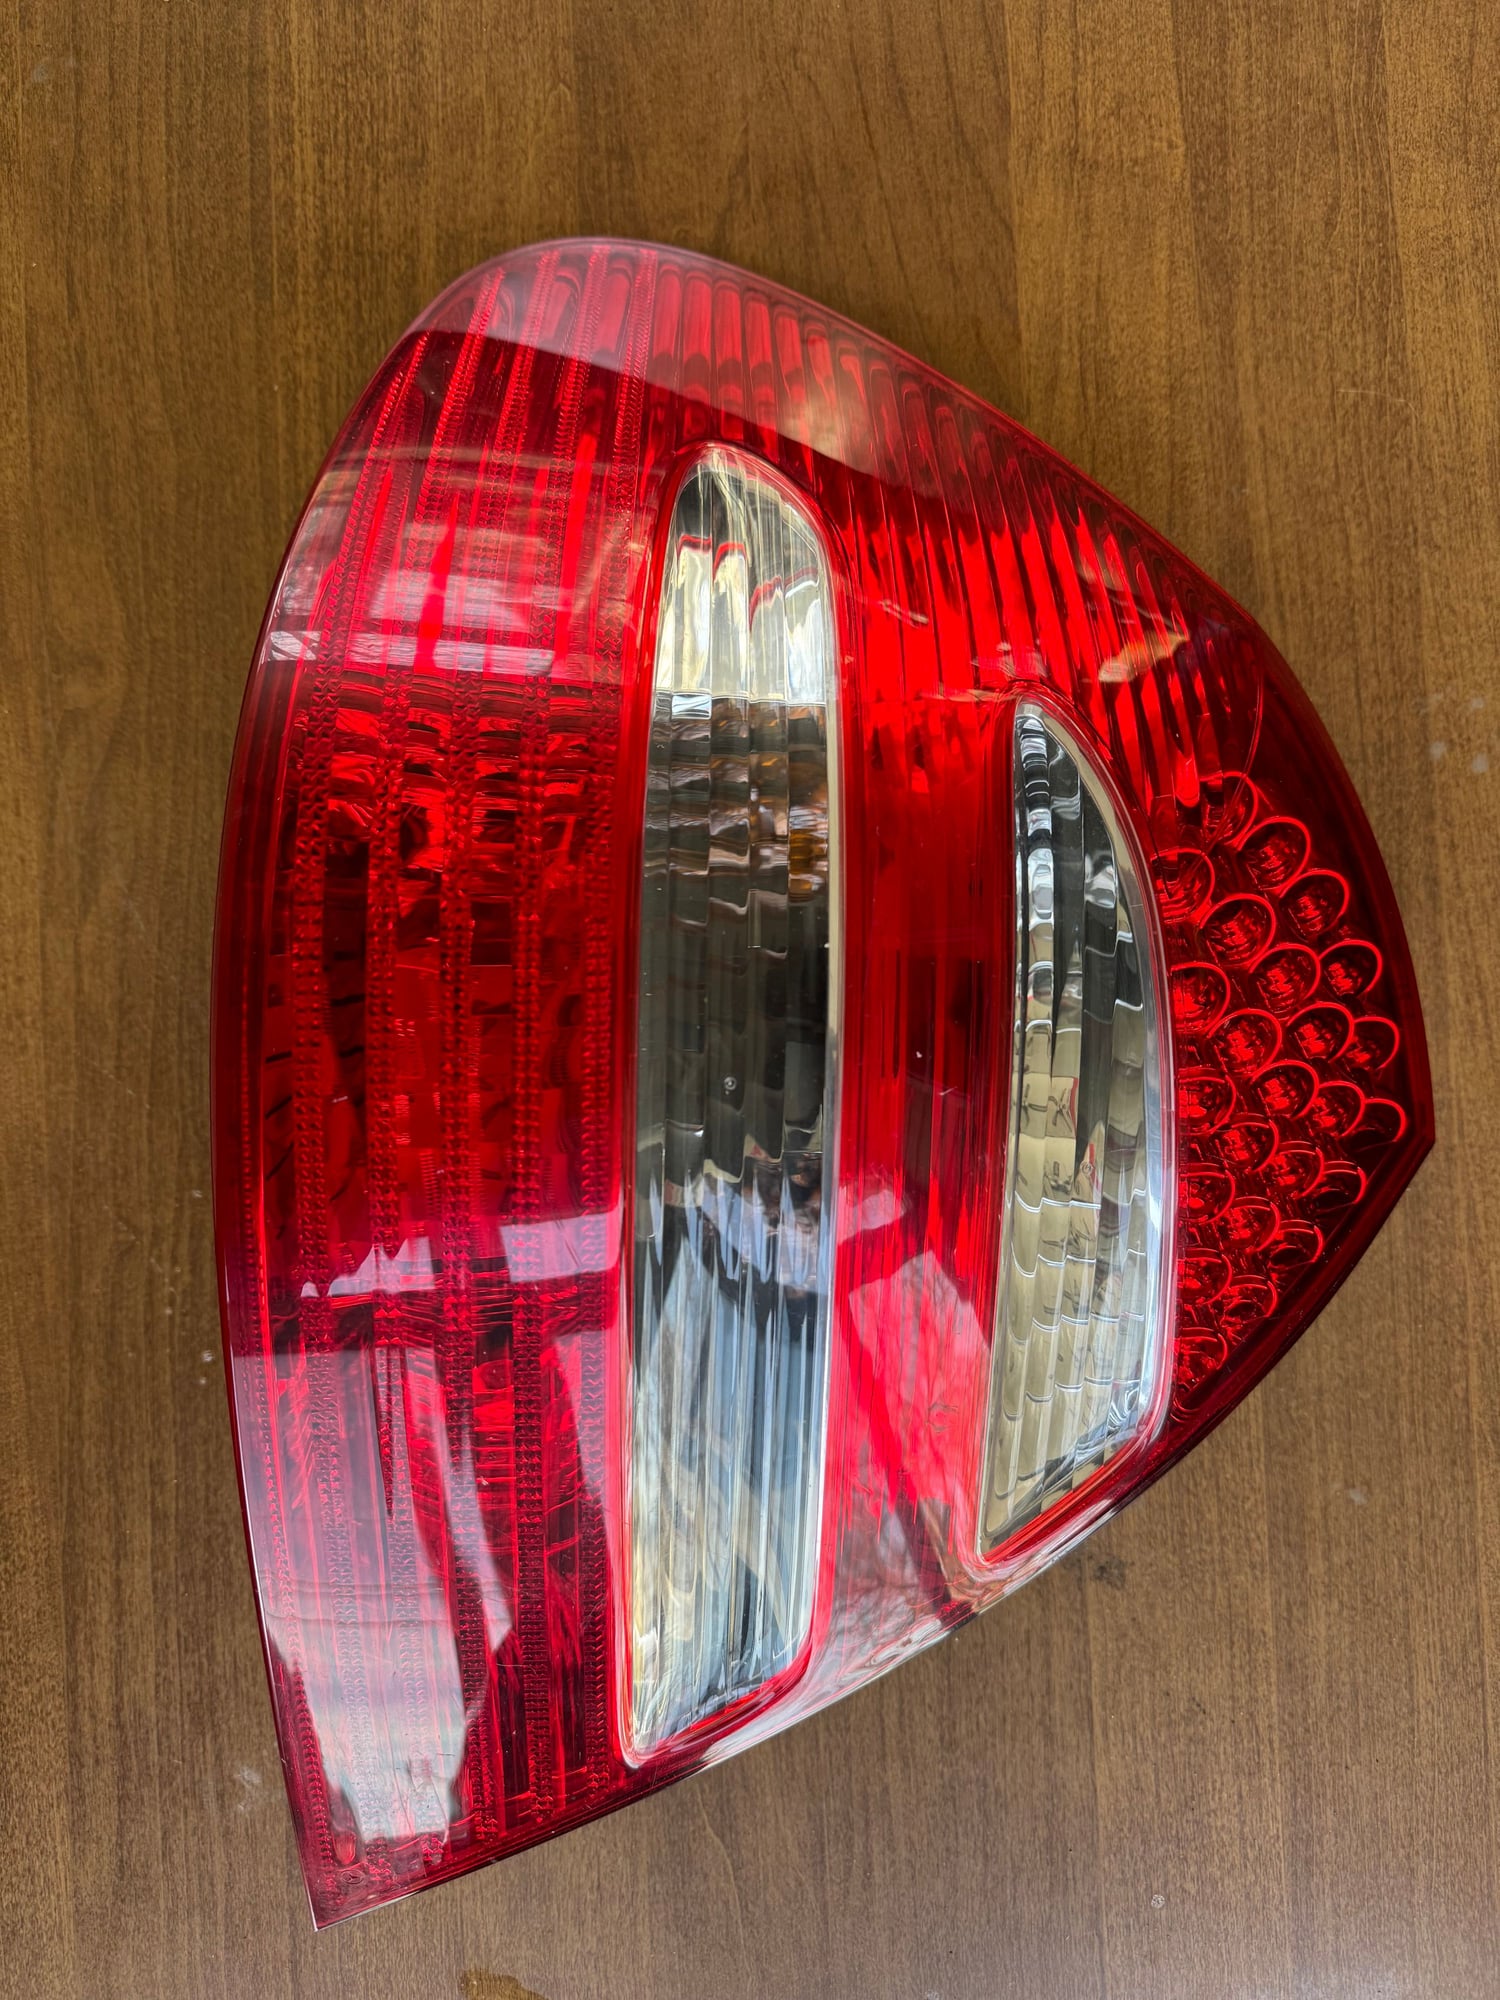 2005 Mercedes-Benz E55 AMG - Mercedes Benz E-class W211 2003-06 OEM LED Tailights AVANTGARDE - Accessories - $180 - Cleveland, OH 44116, United States